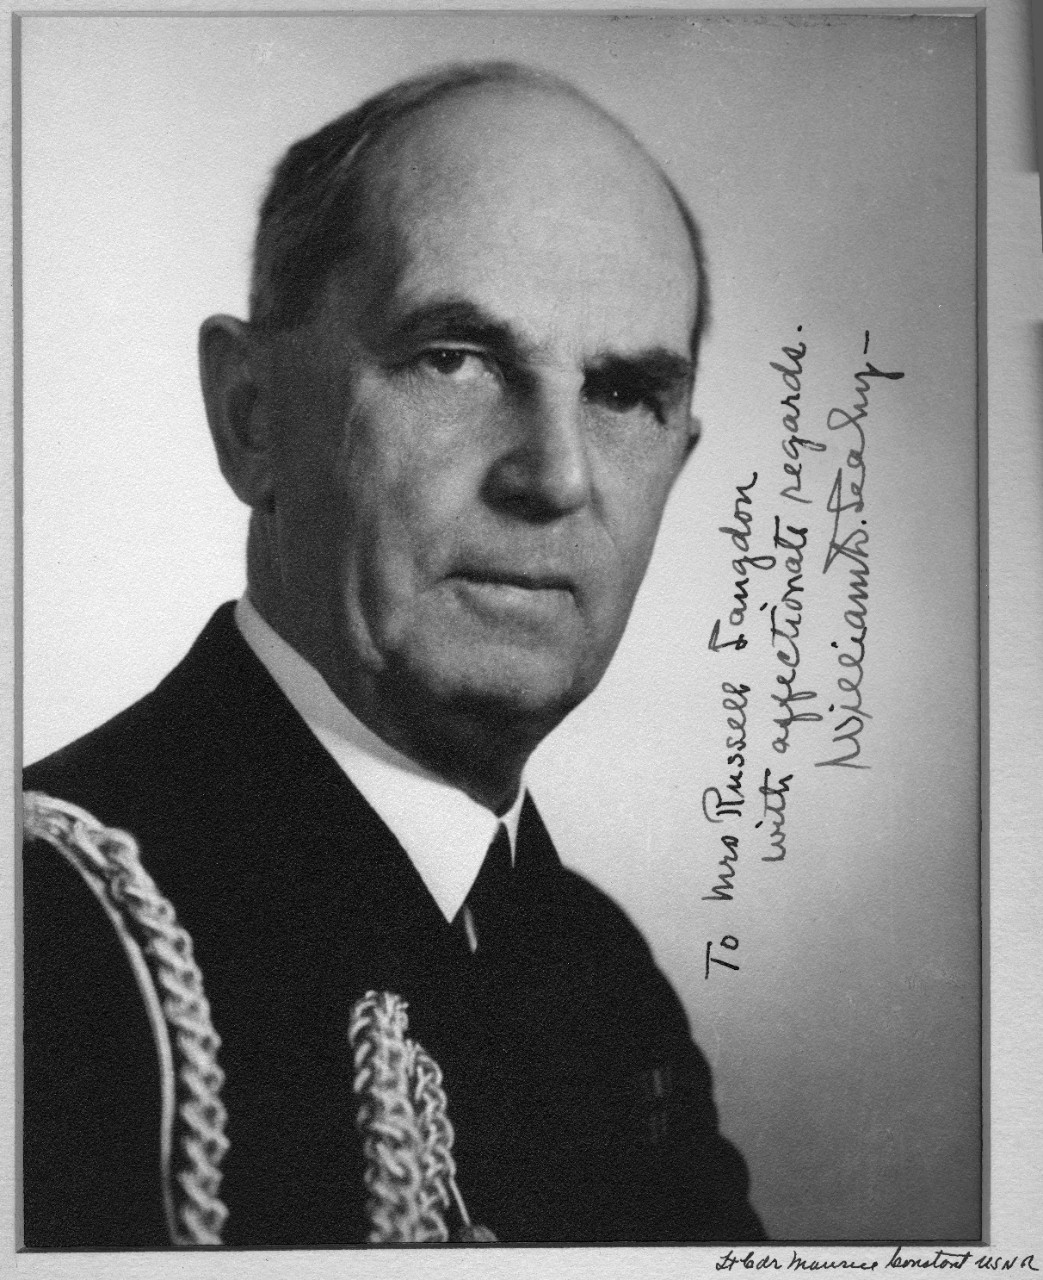 Autographed black and white photo of Fleet Admiral William Leahy, donated to the Naval Historical Foundation in 1964 by Commander Edward S. Mole. Autograph is made out to Mrs. Russell Landon. Photographer may be Lieutenant Commander Maurice Constant.